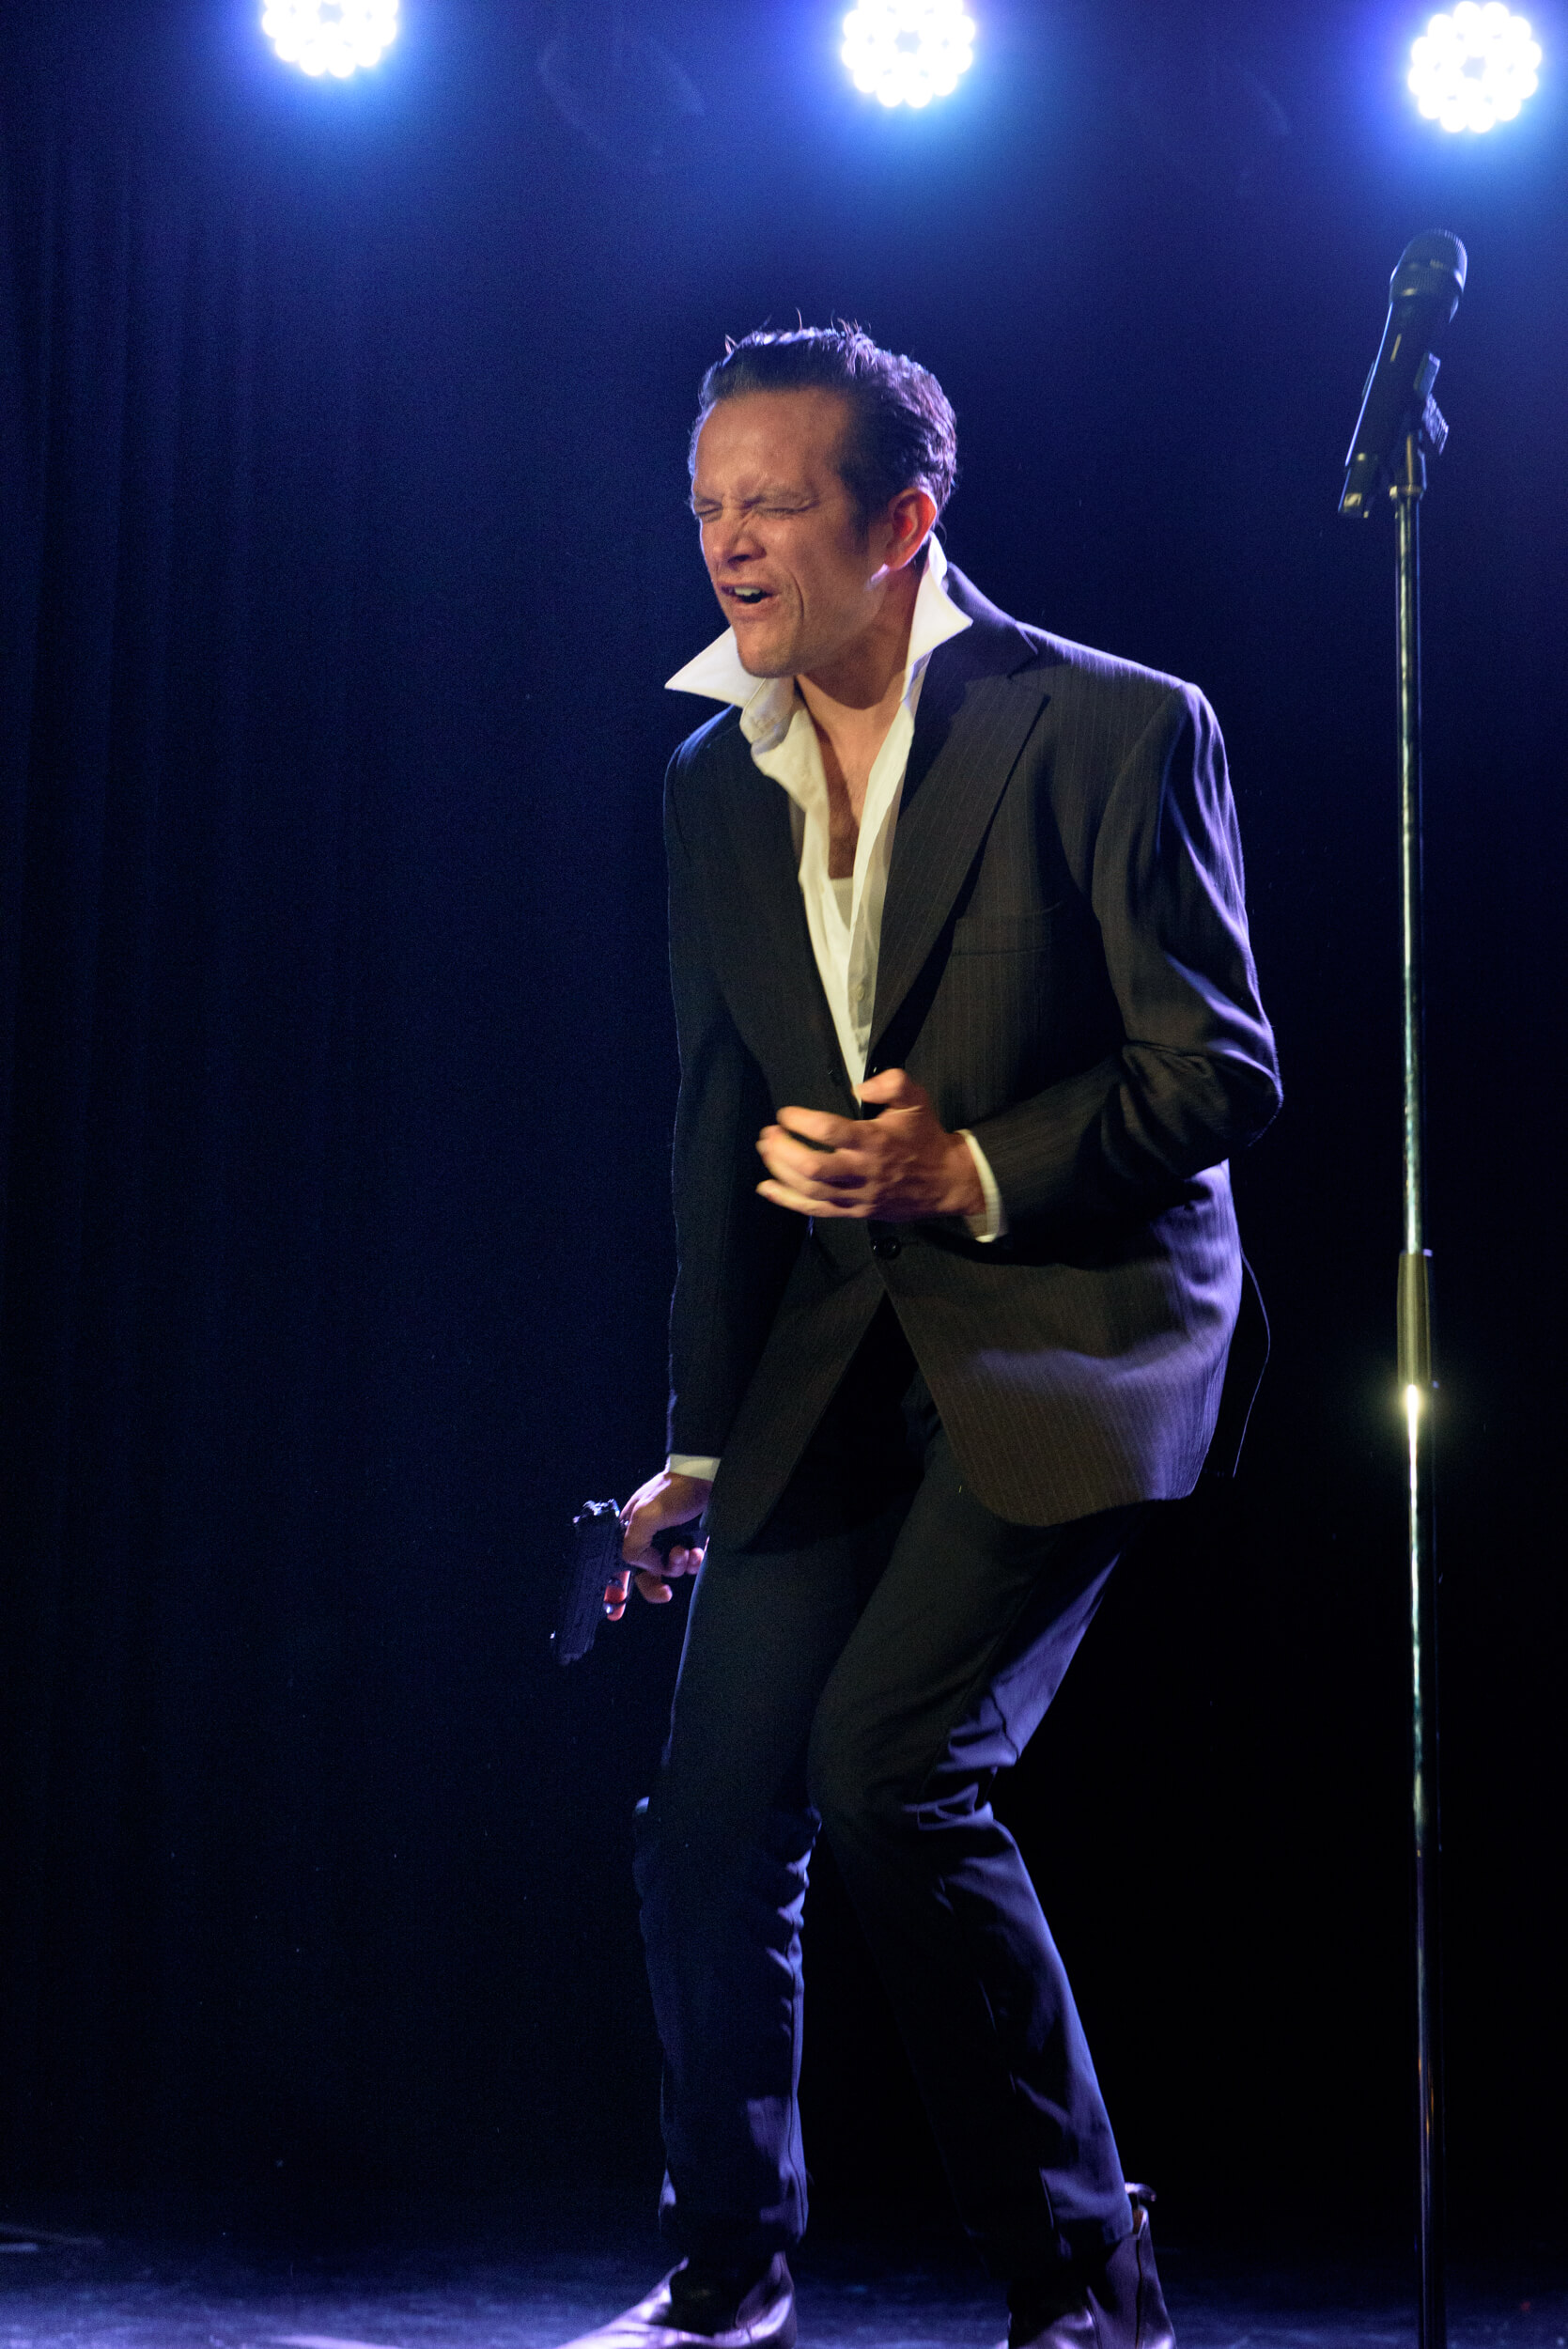 A performer in a black suit with a white shirt is holding a gun pointed at his foot. He has a pained expression on his face.